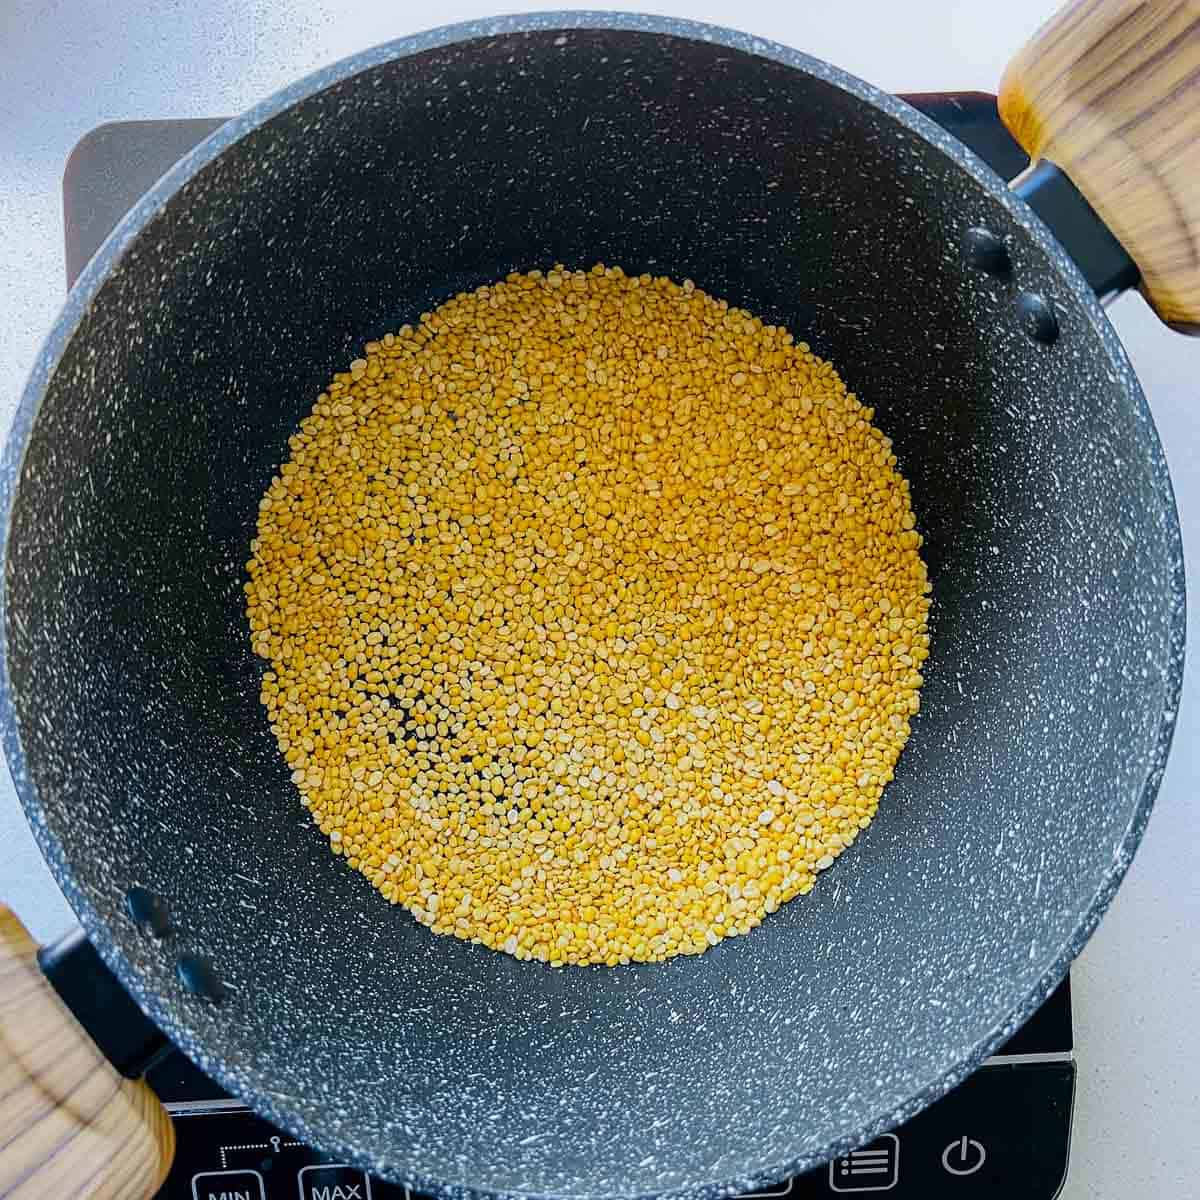 Roasted moong dal in a pan.